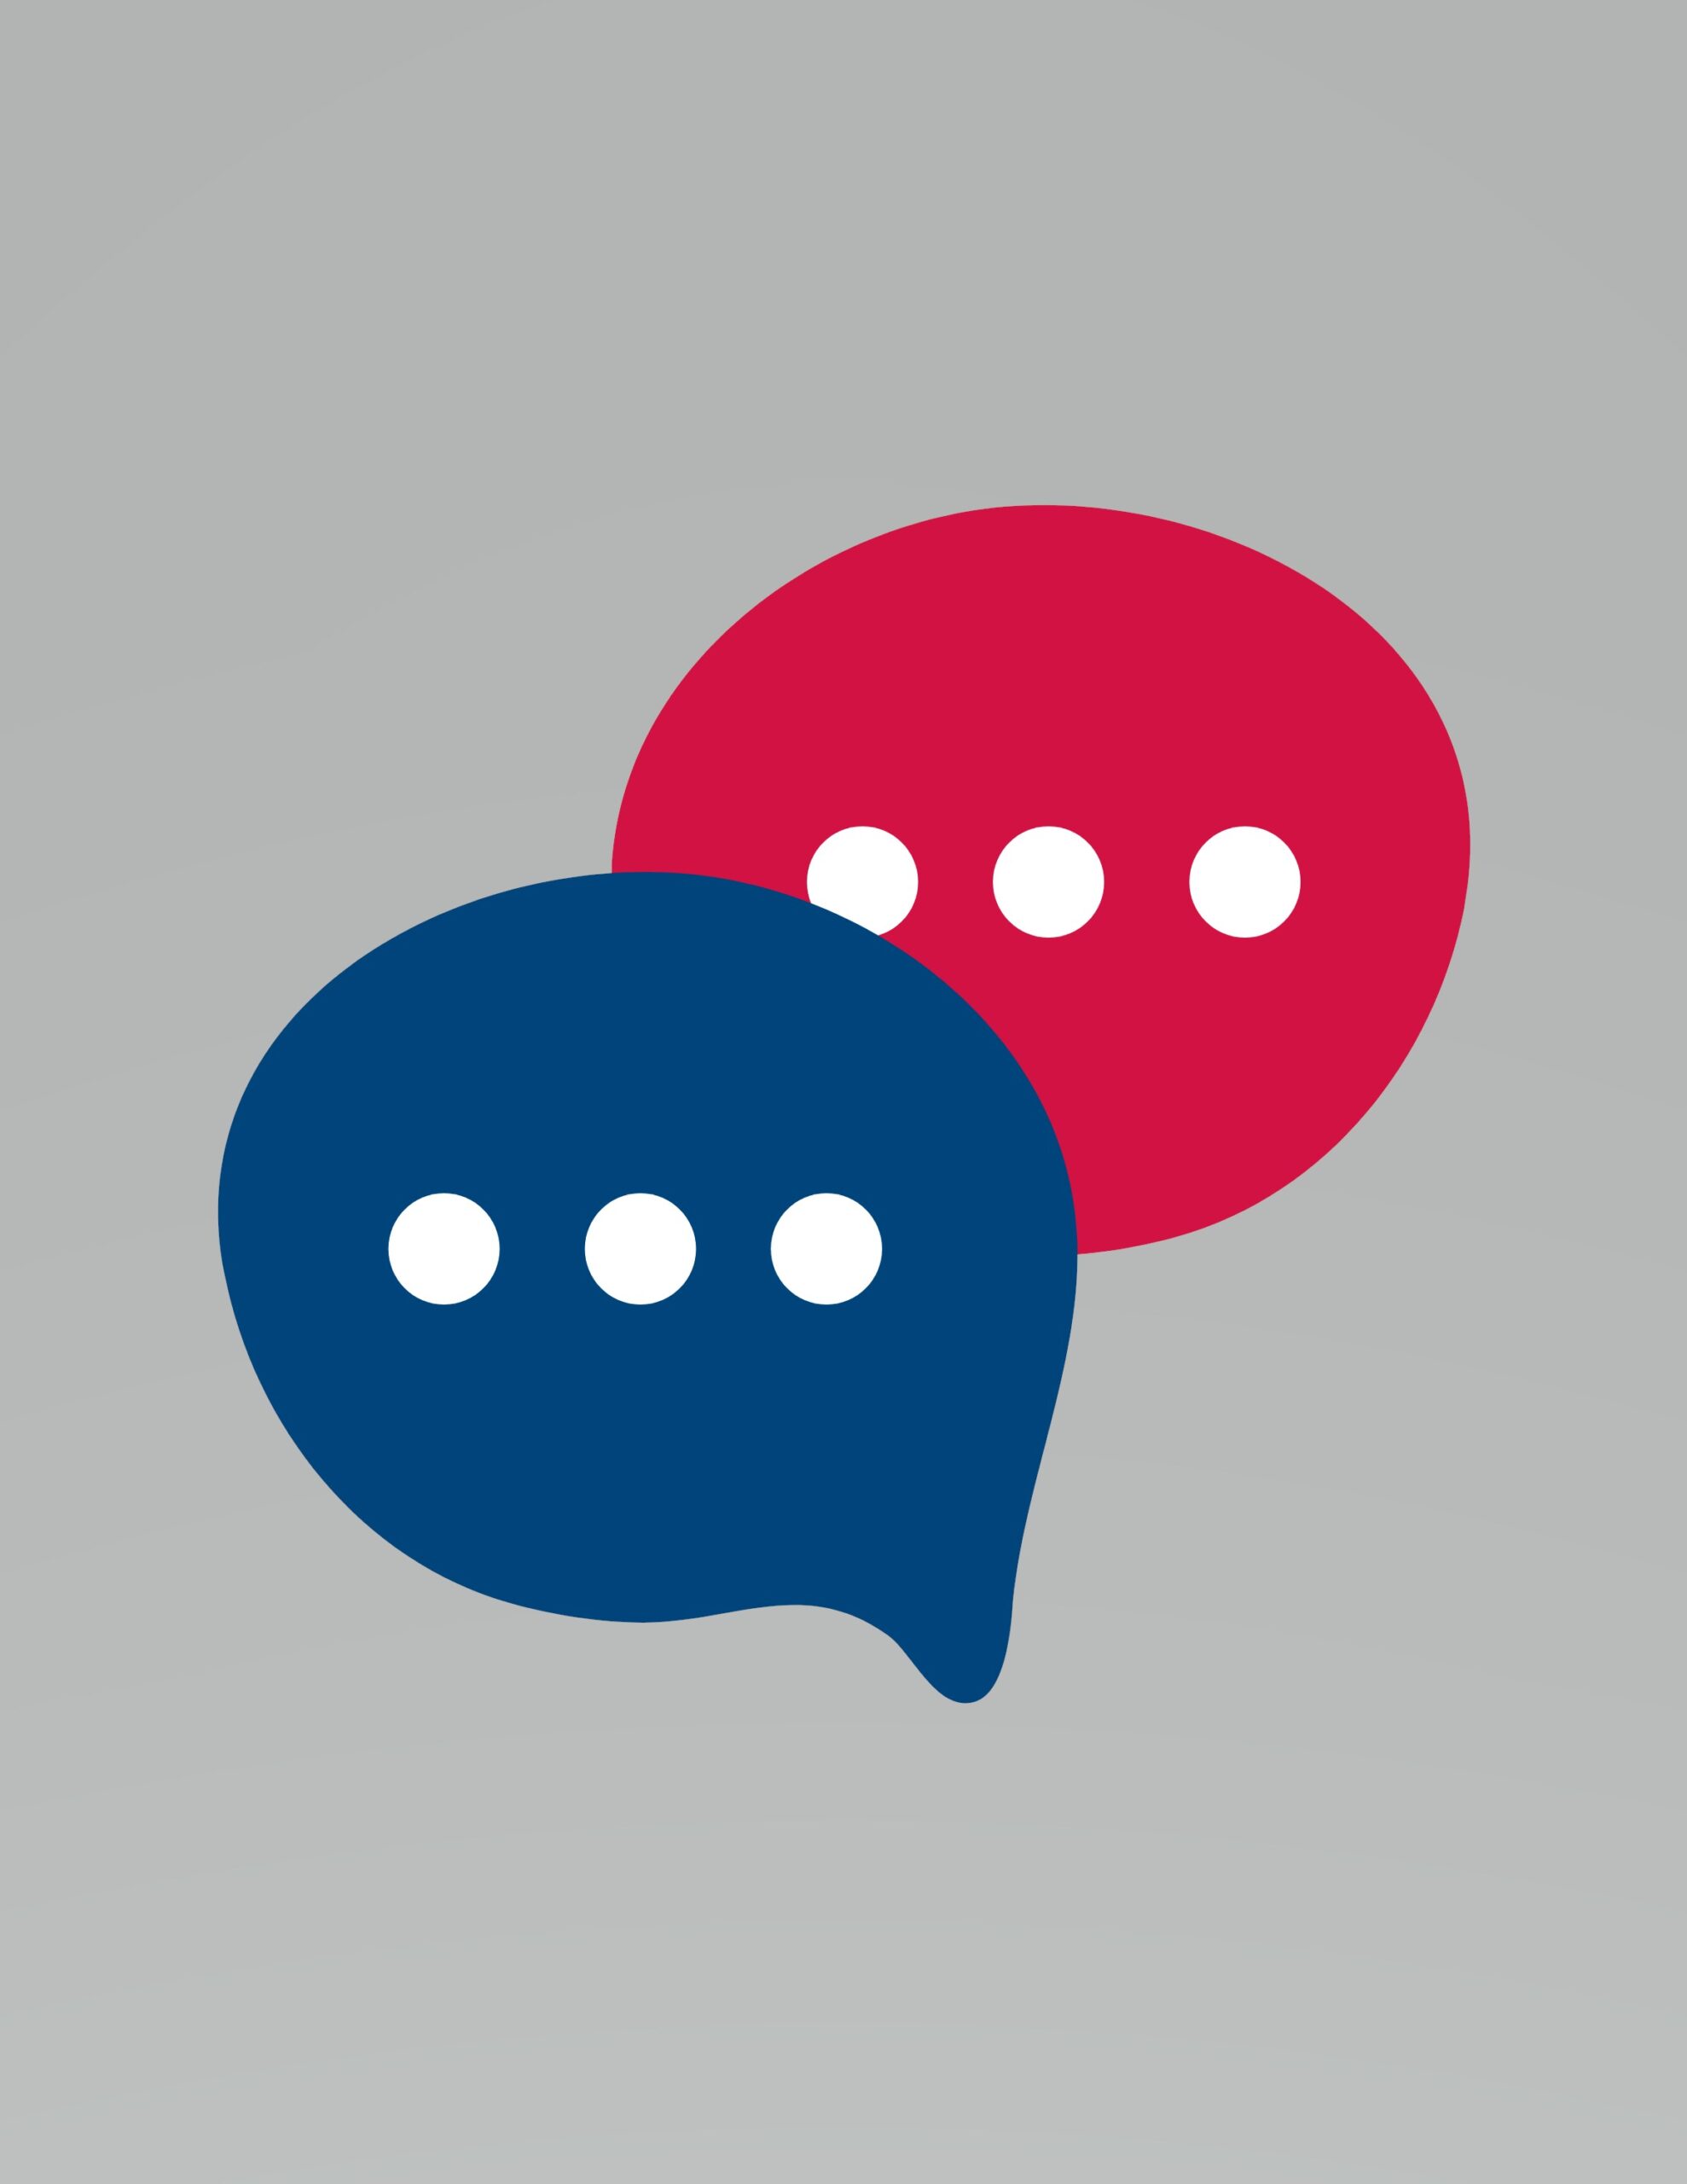 Graphic of two online chat icons